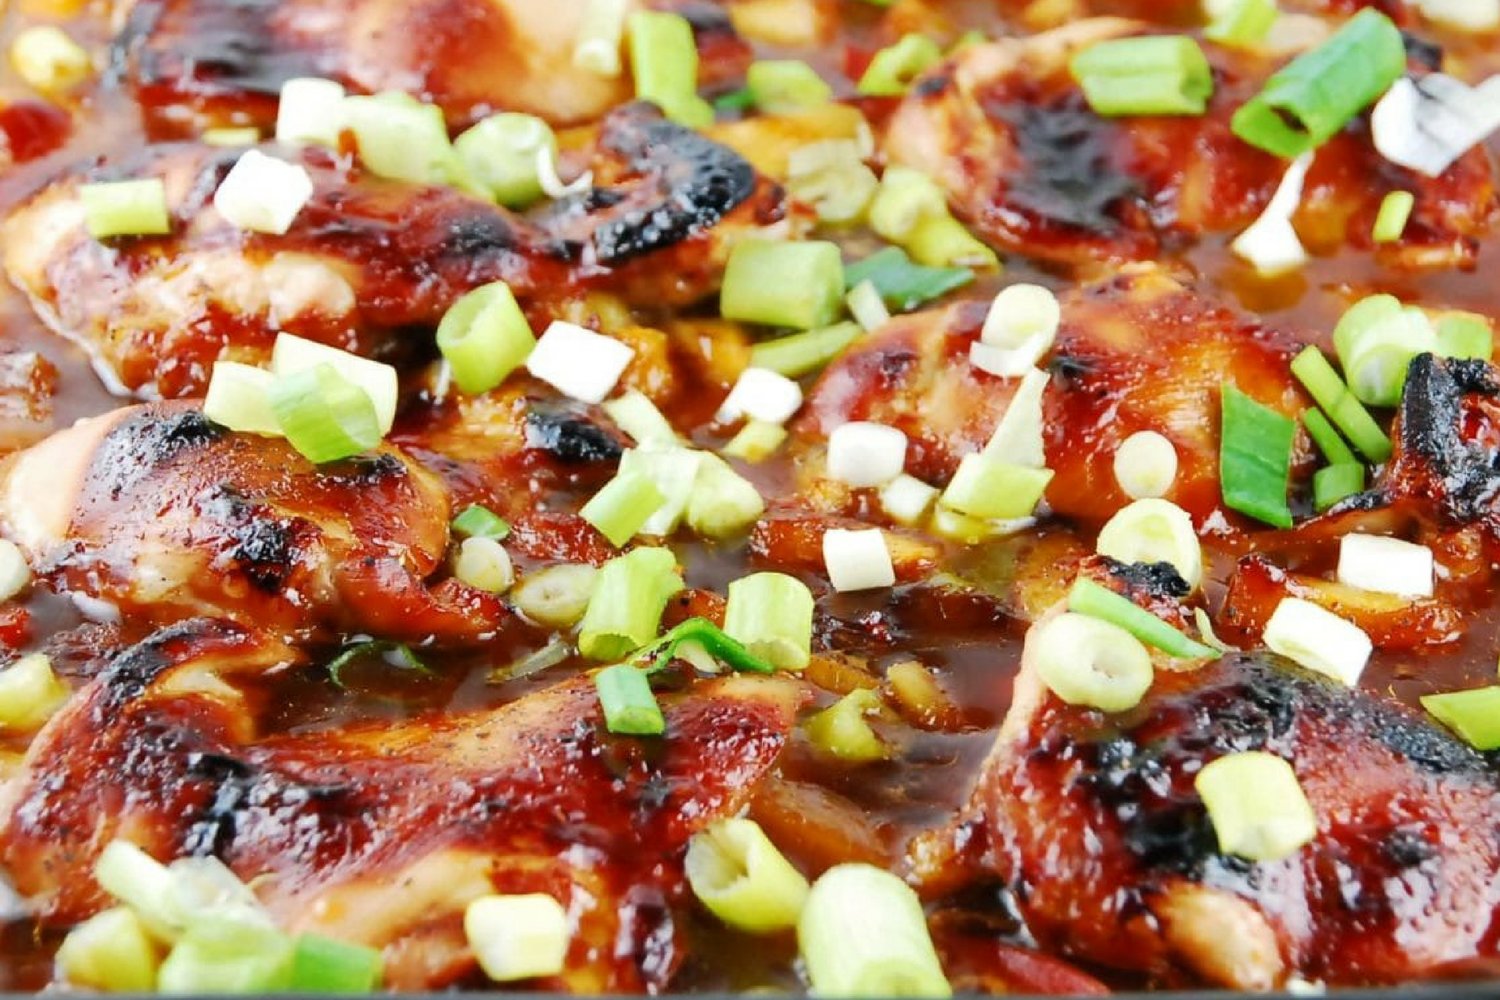 Baked teriyaki chicken in a glass dish with green onions.